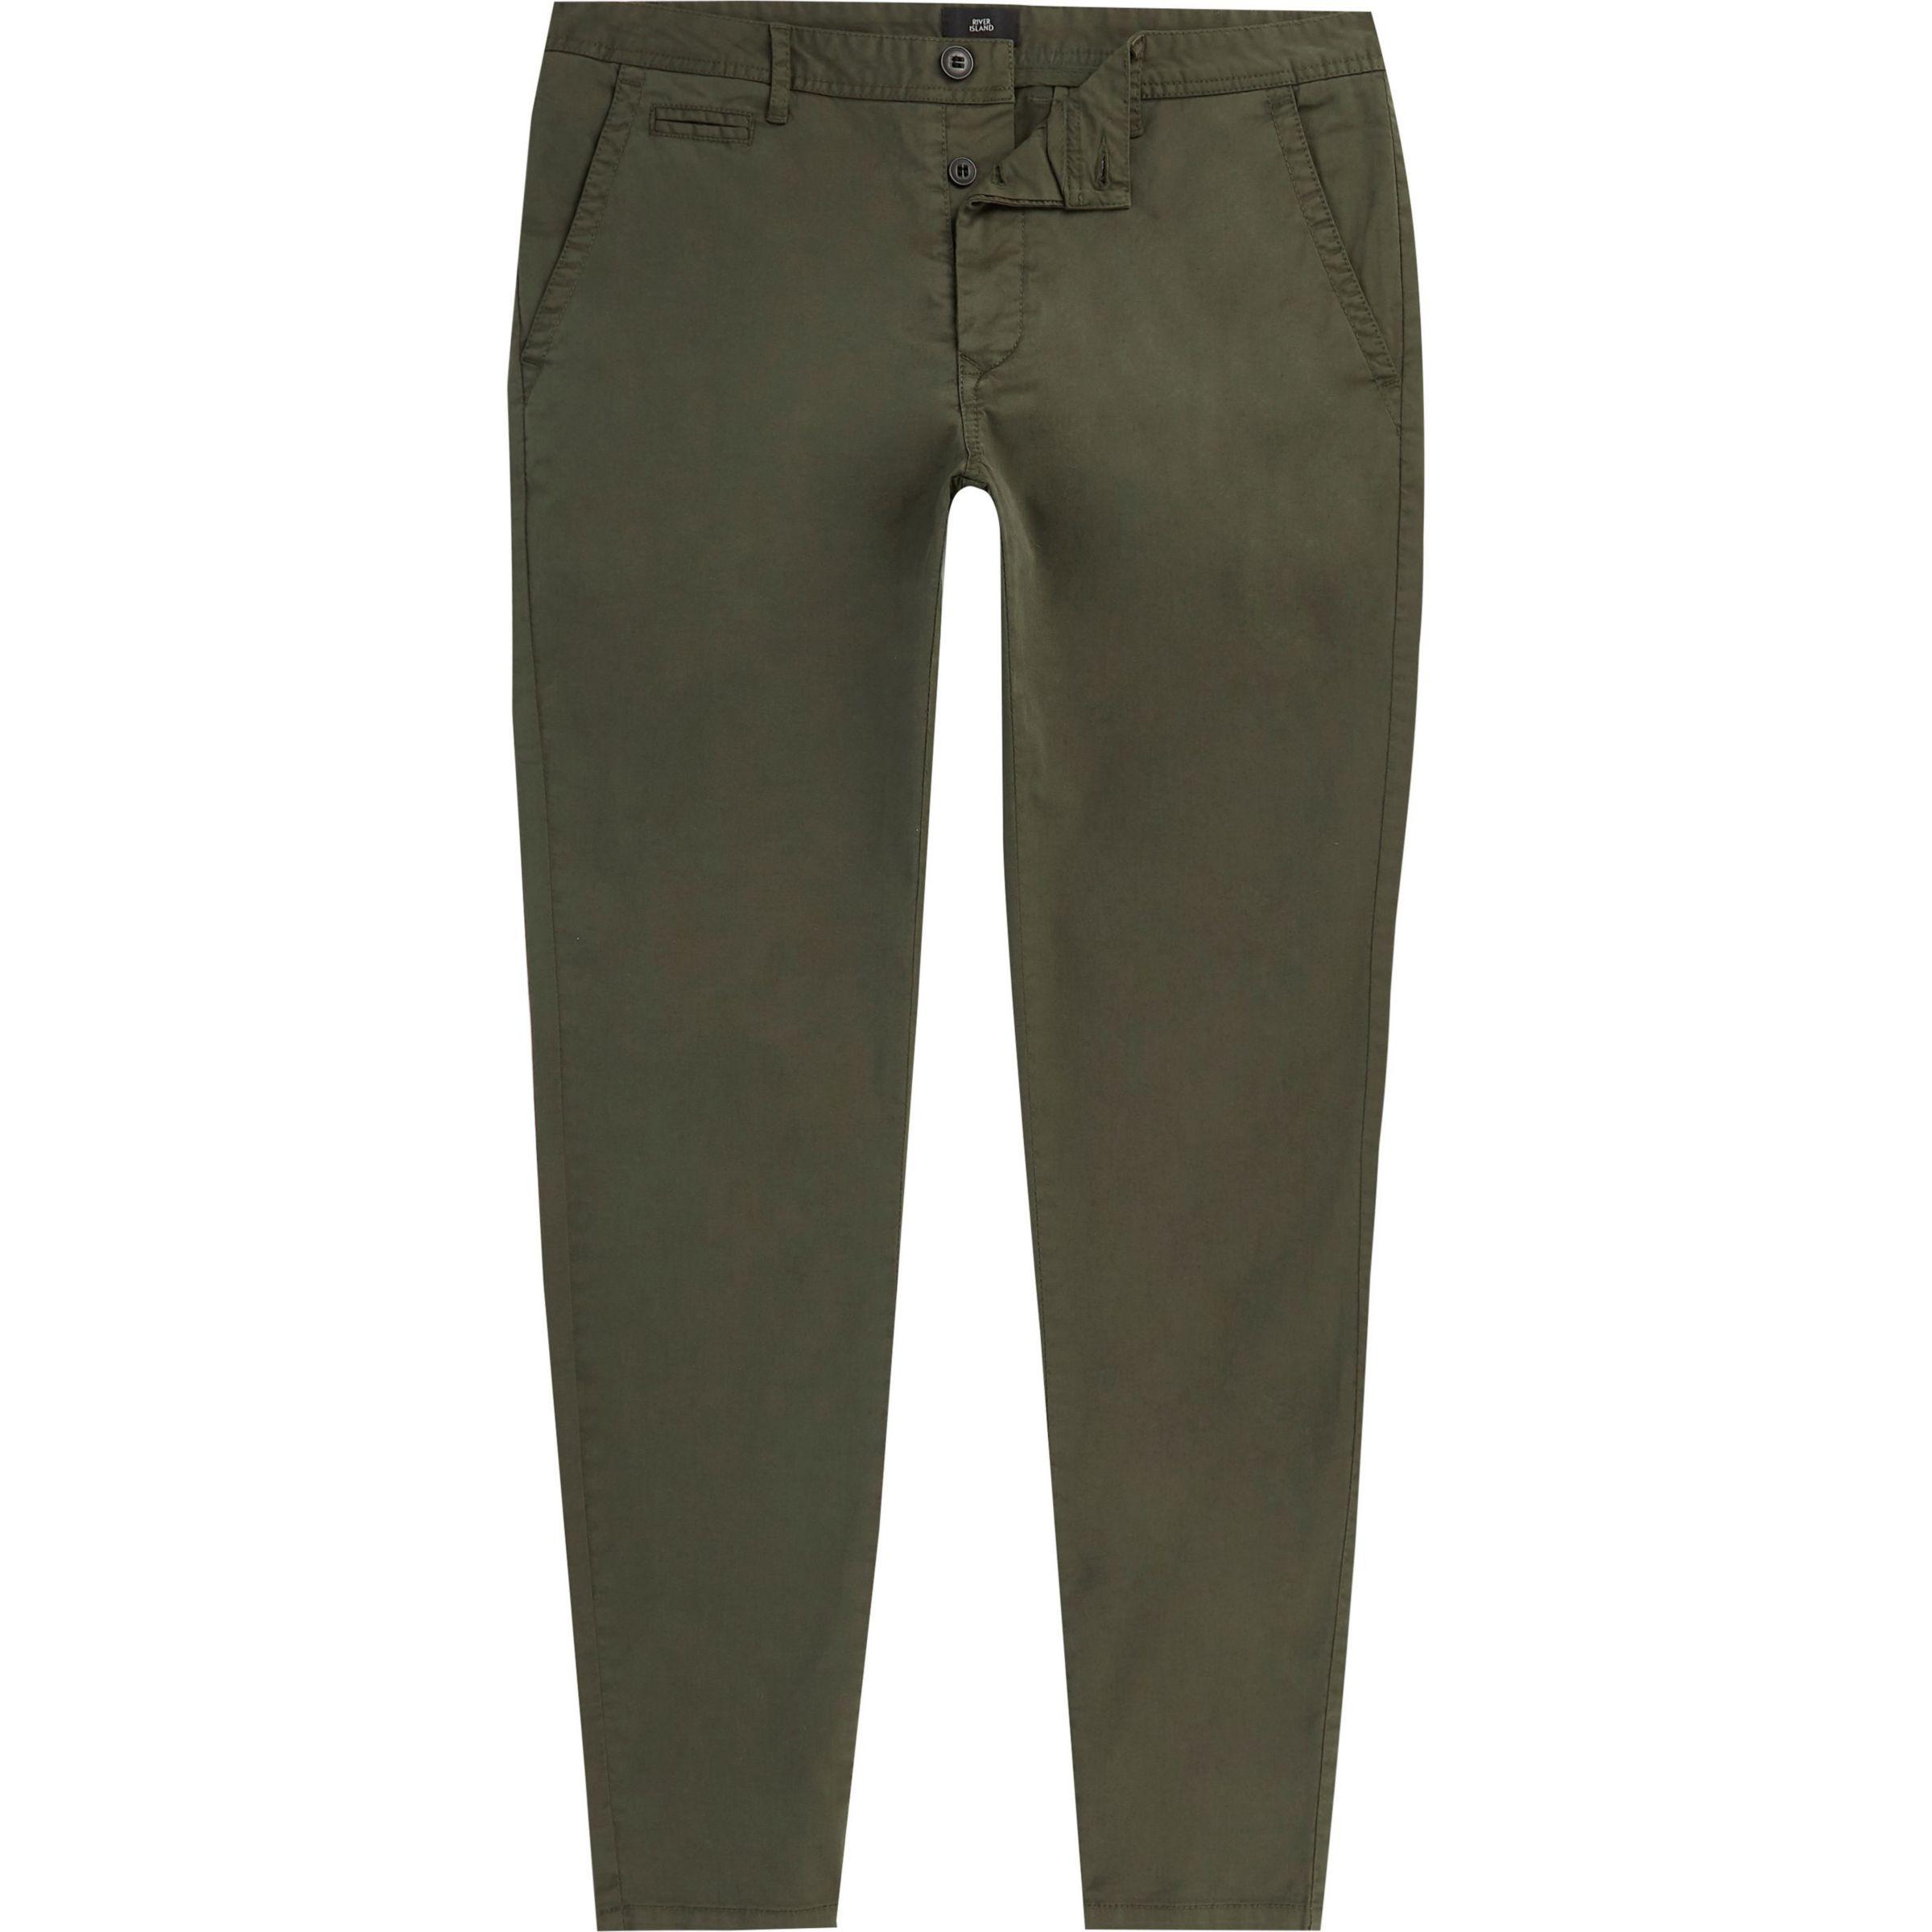 River Island Cotton Dark Super Skinny Chino Trousers in Green for Men - Lyst